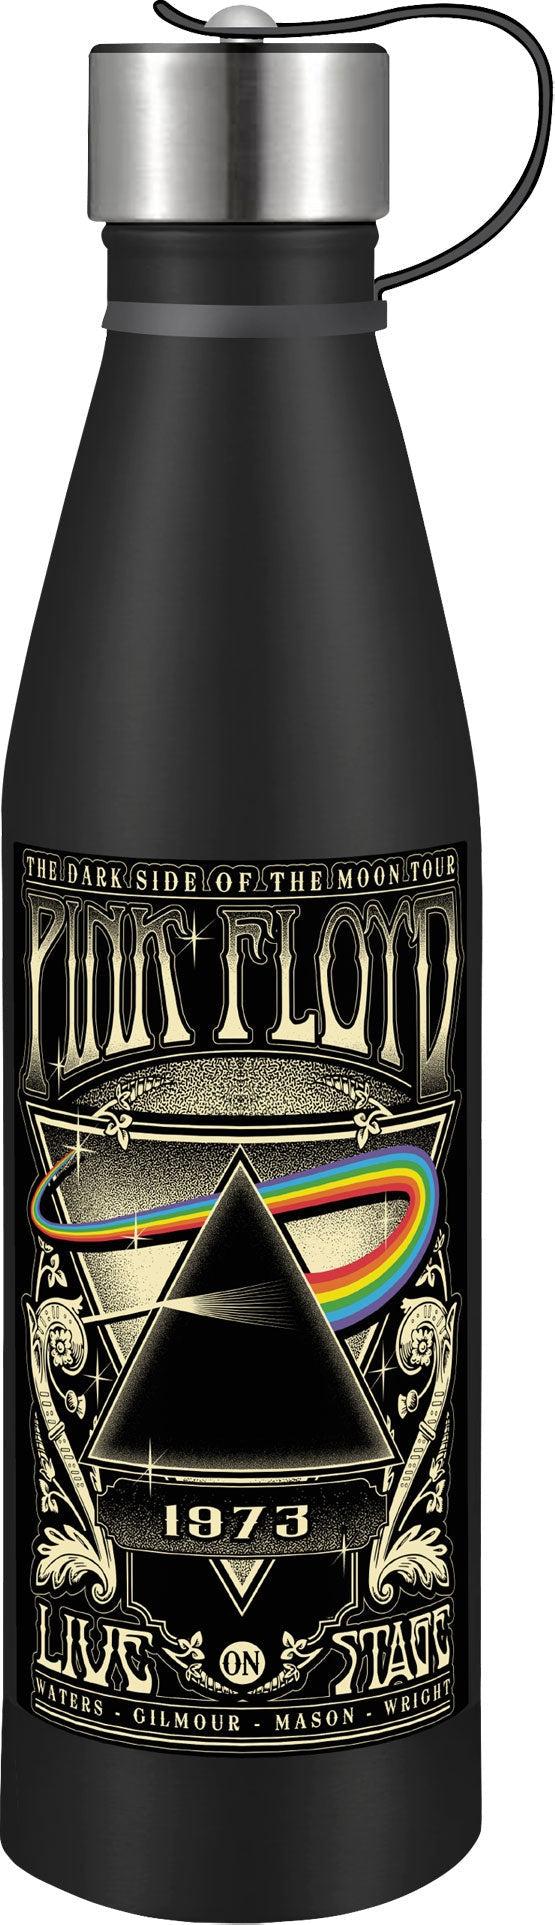 Pink Floyd Dark Side Of The Moon Concert Poster 17 oz Stainless Steel Pin Bottle